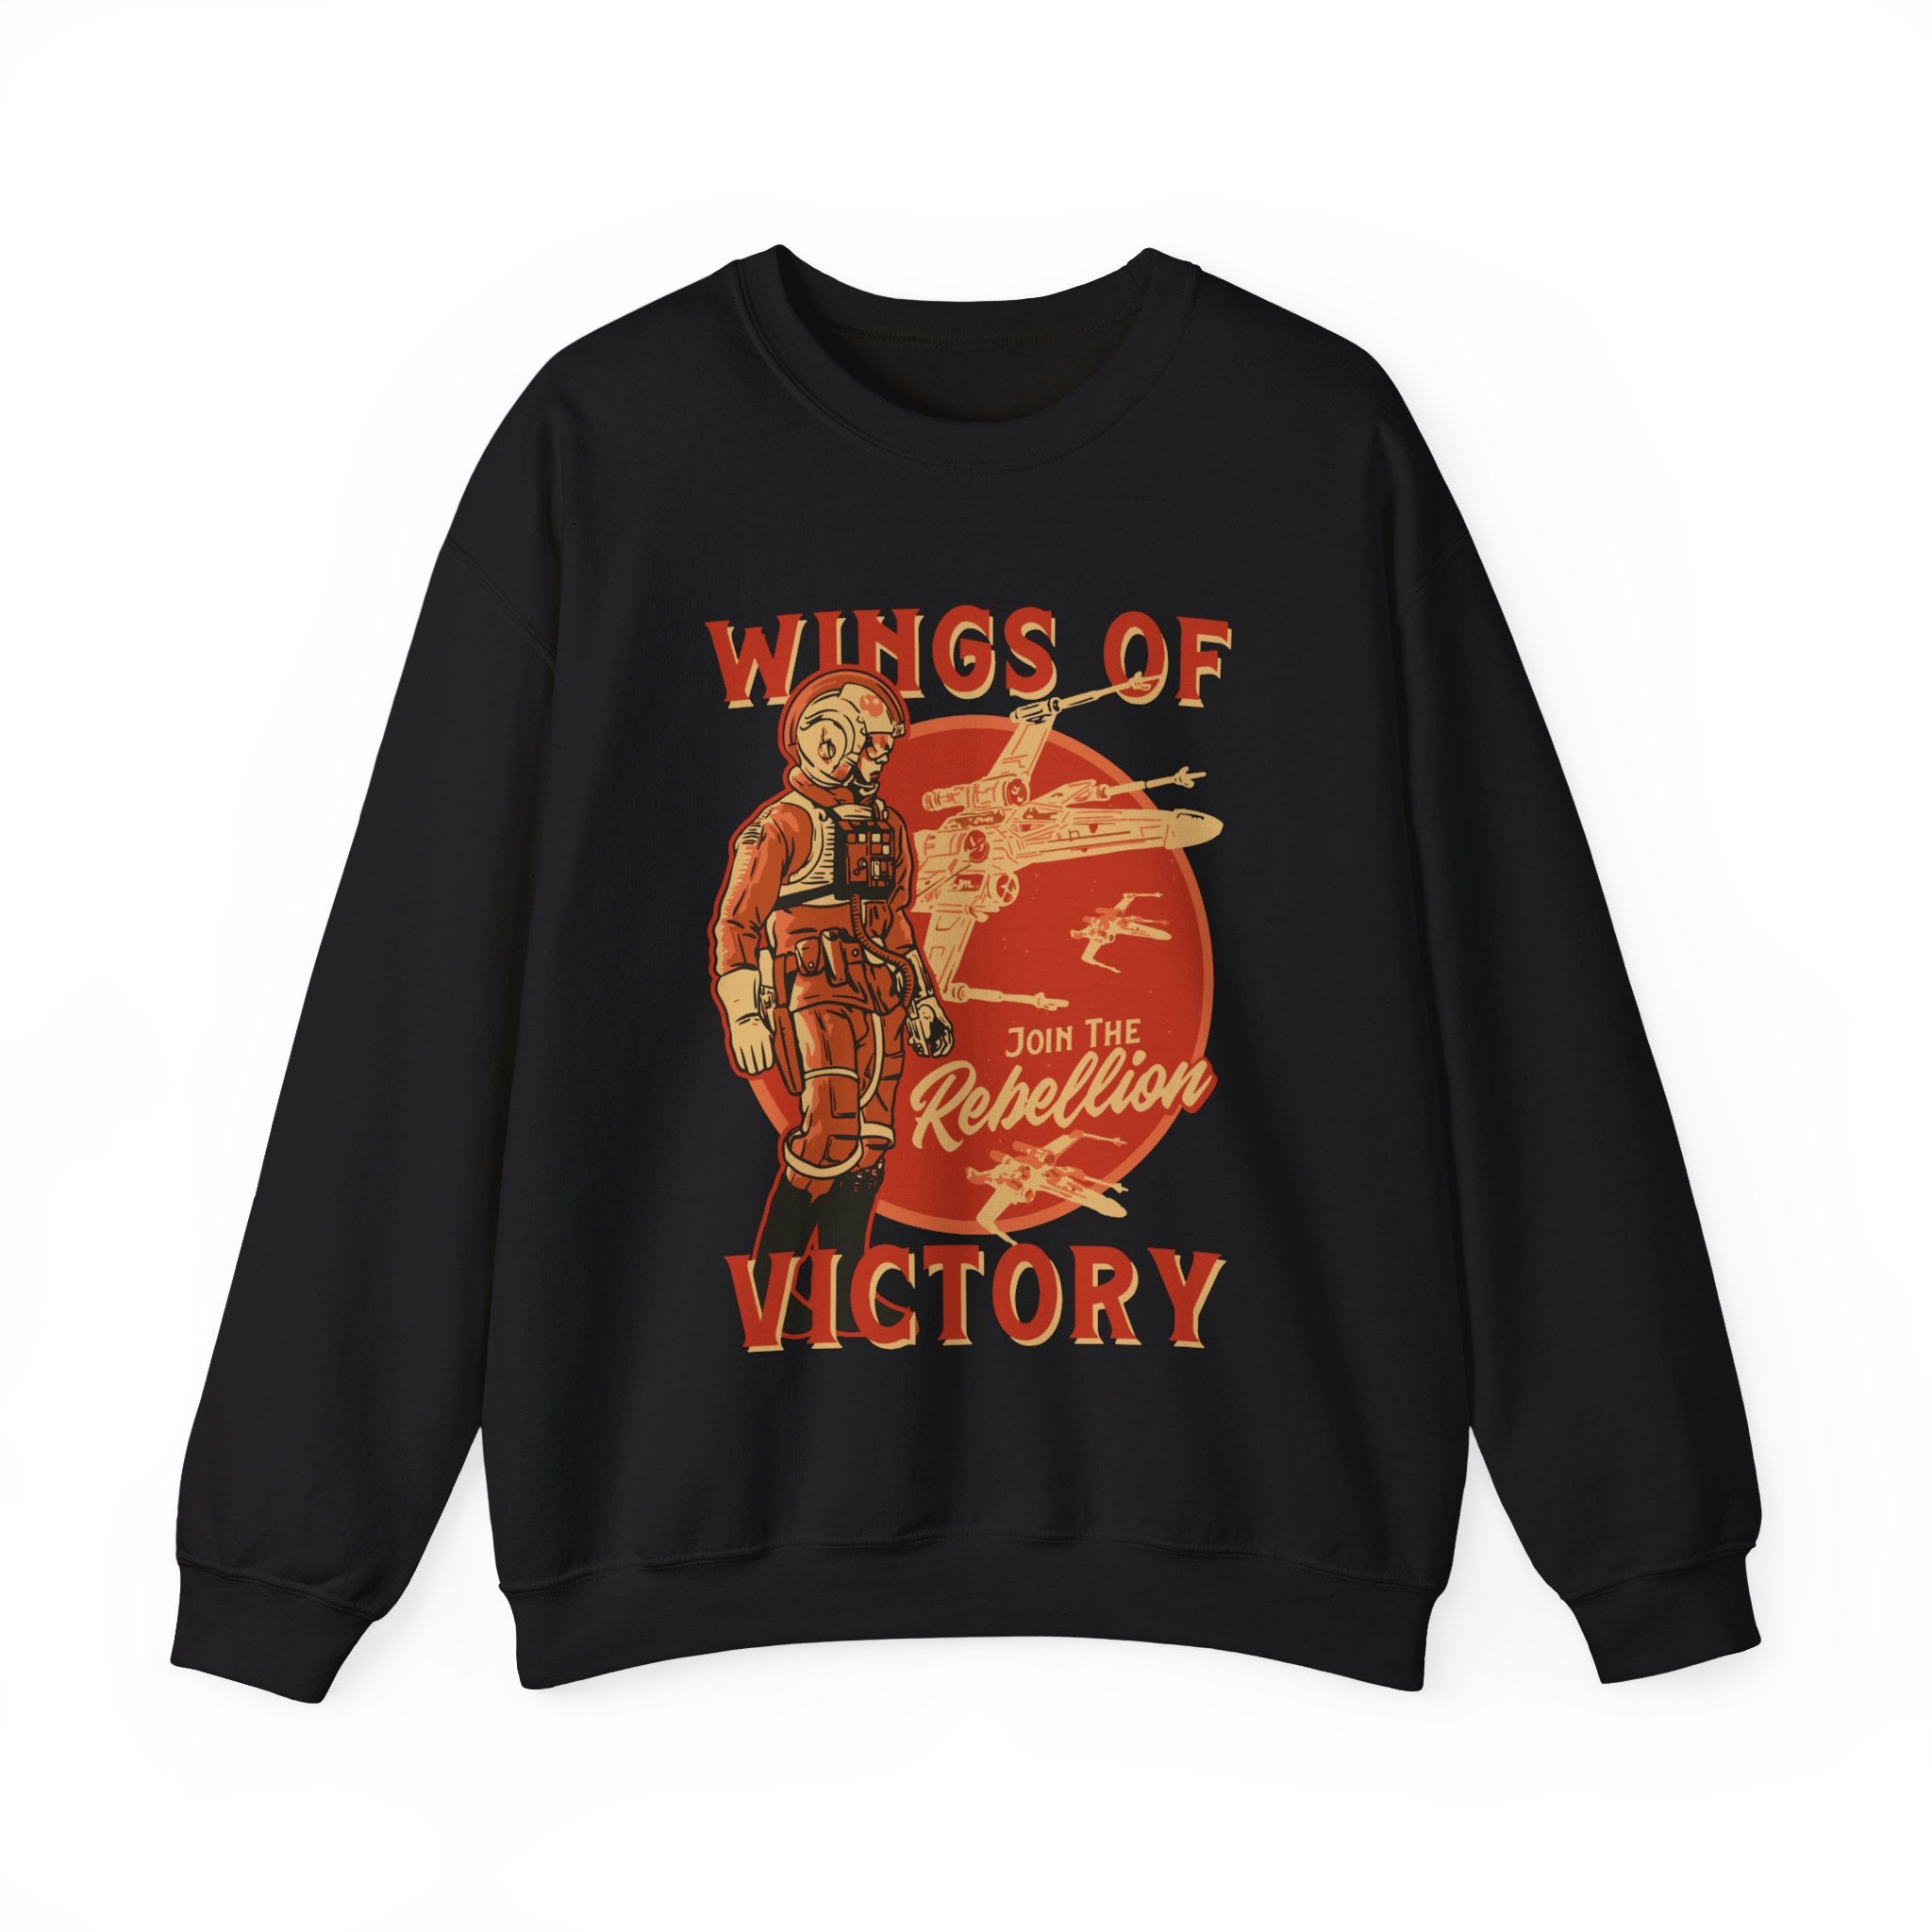 A black Wings of Victory - Sweatshirt with a graphic of a space pilot and X-wing fighters, accompanied by the text "Wings of Victory" and "Join the Rebellion" in bold, vintage-style lettering. This sweatshirt blends comfort and style, making it perfect for any fan looking to showcase their rebel spirit.